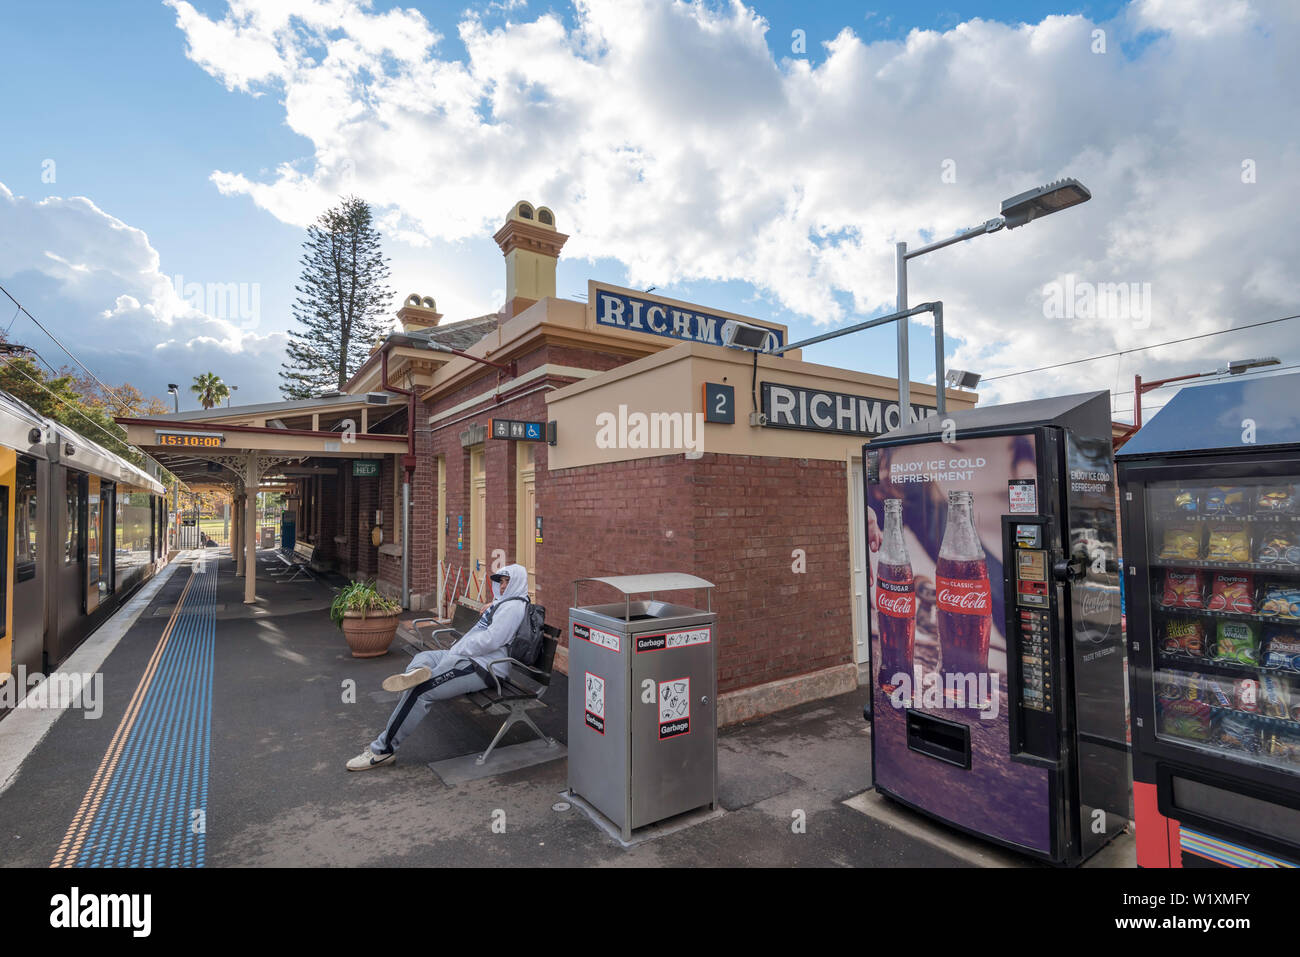 First opened in 1864, Richmond railway station is the heritage listed terminus railway station of the Richmond rail line in New South Wales Australia Stock Photo